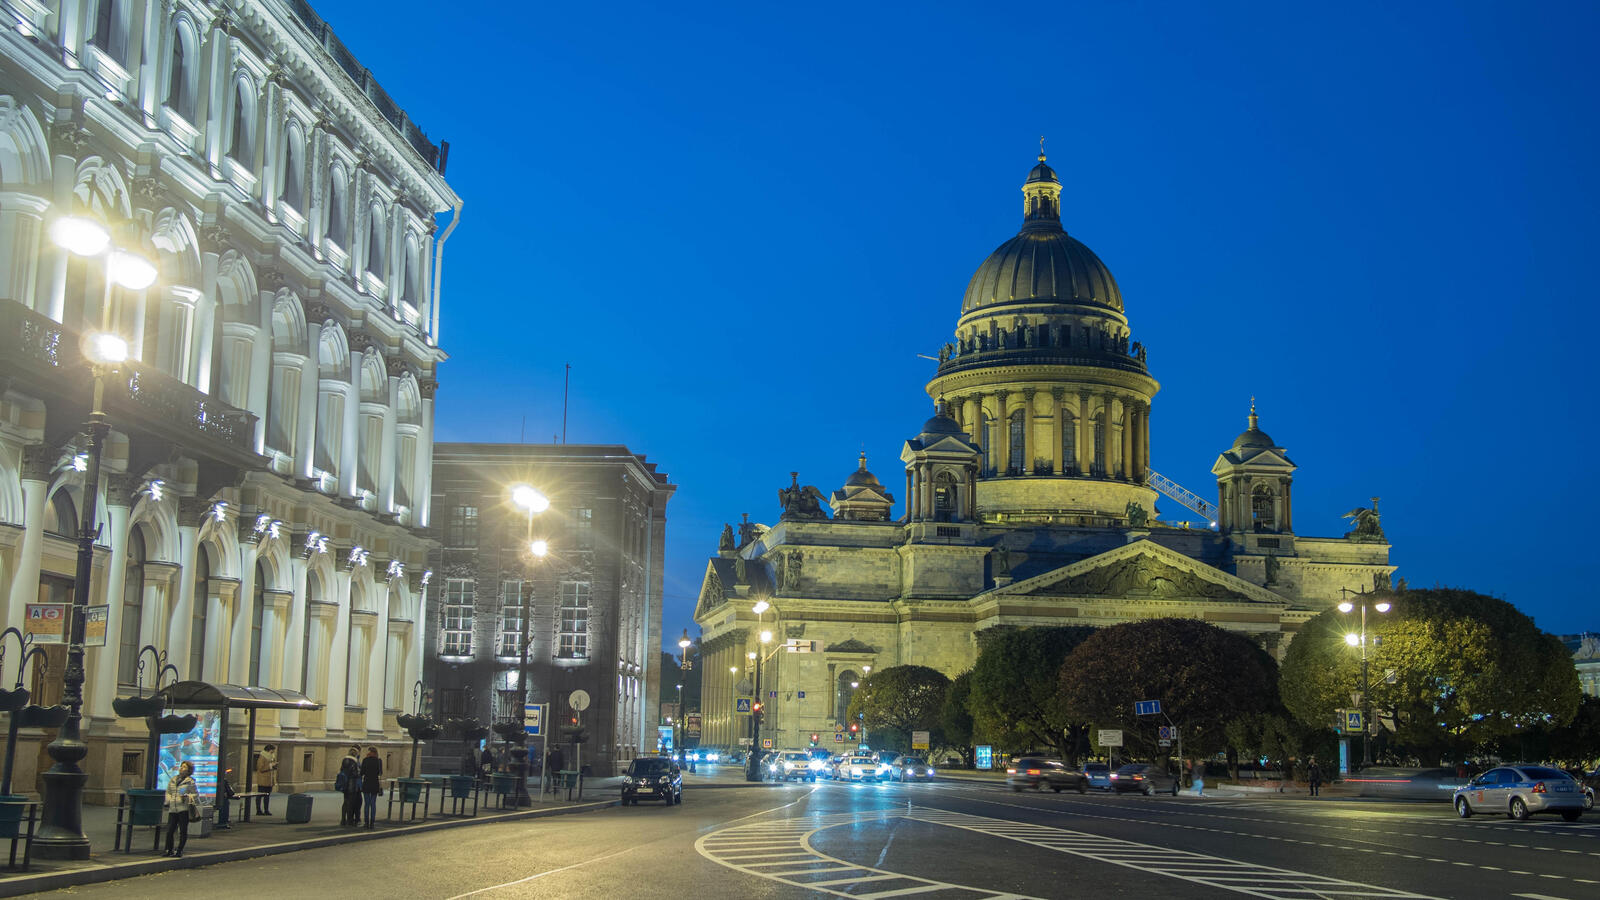 Wallpapers St Isaac s Cathedral Saint-Petersburg city on the desktop